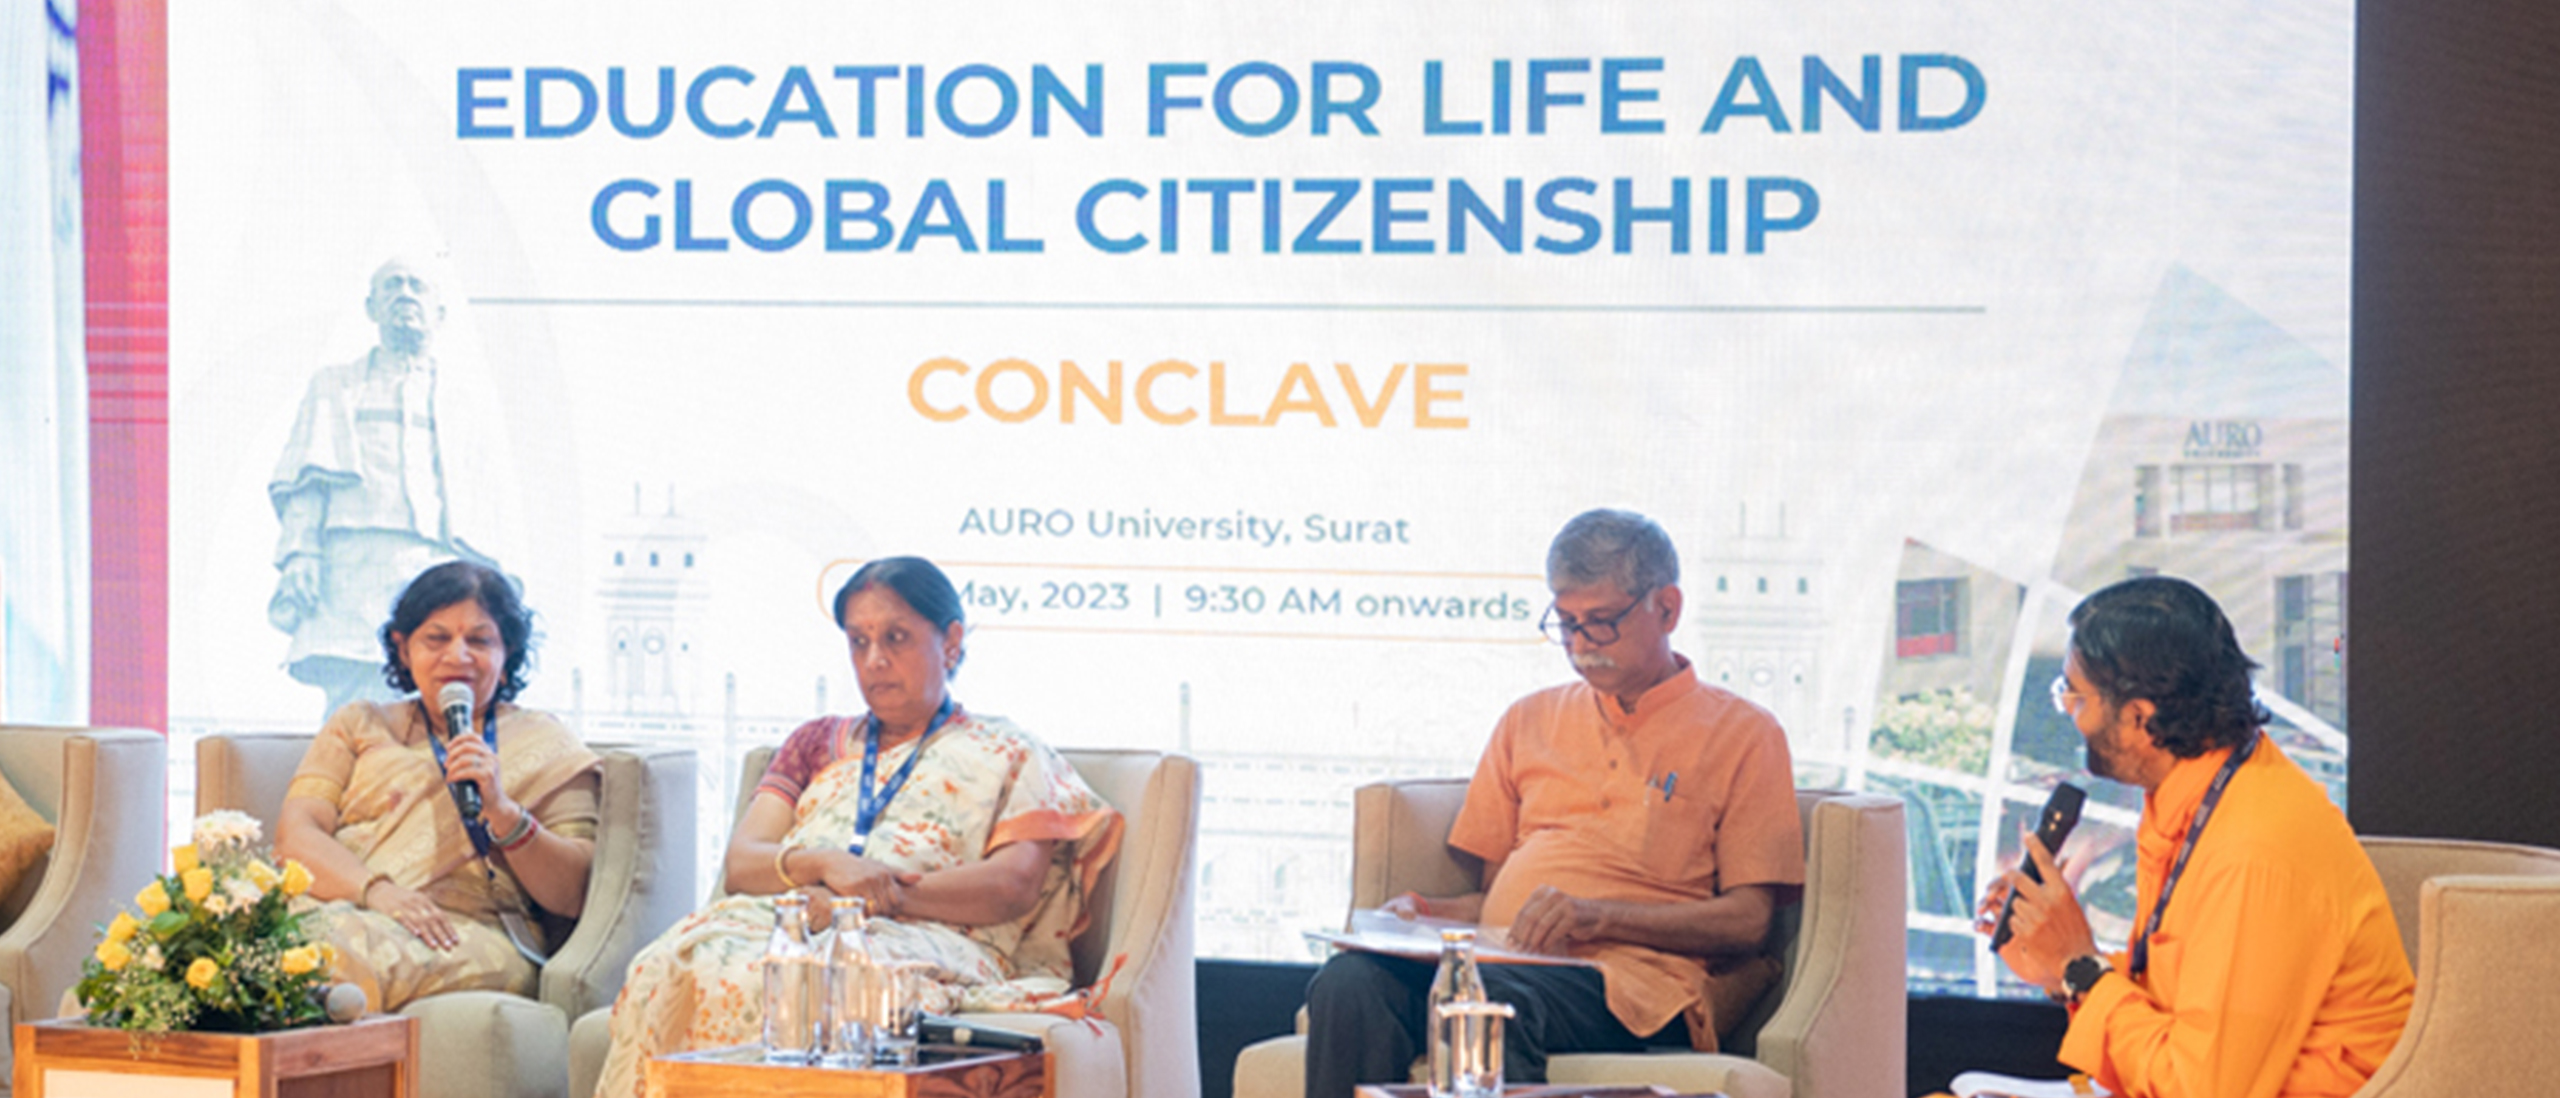 c20-conclave-on-education-for-life-and-global-citizenship-image-1.jpg